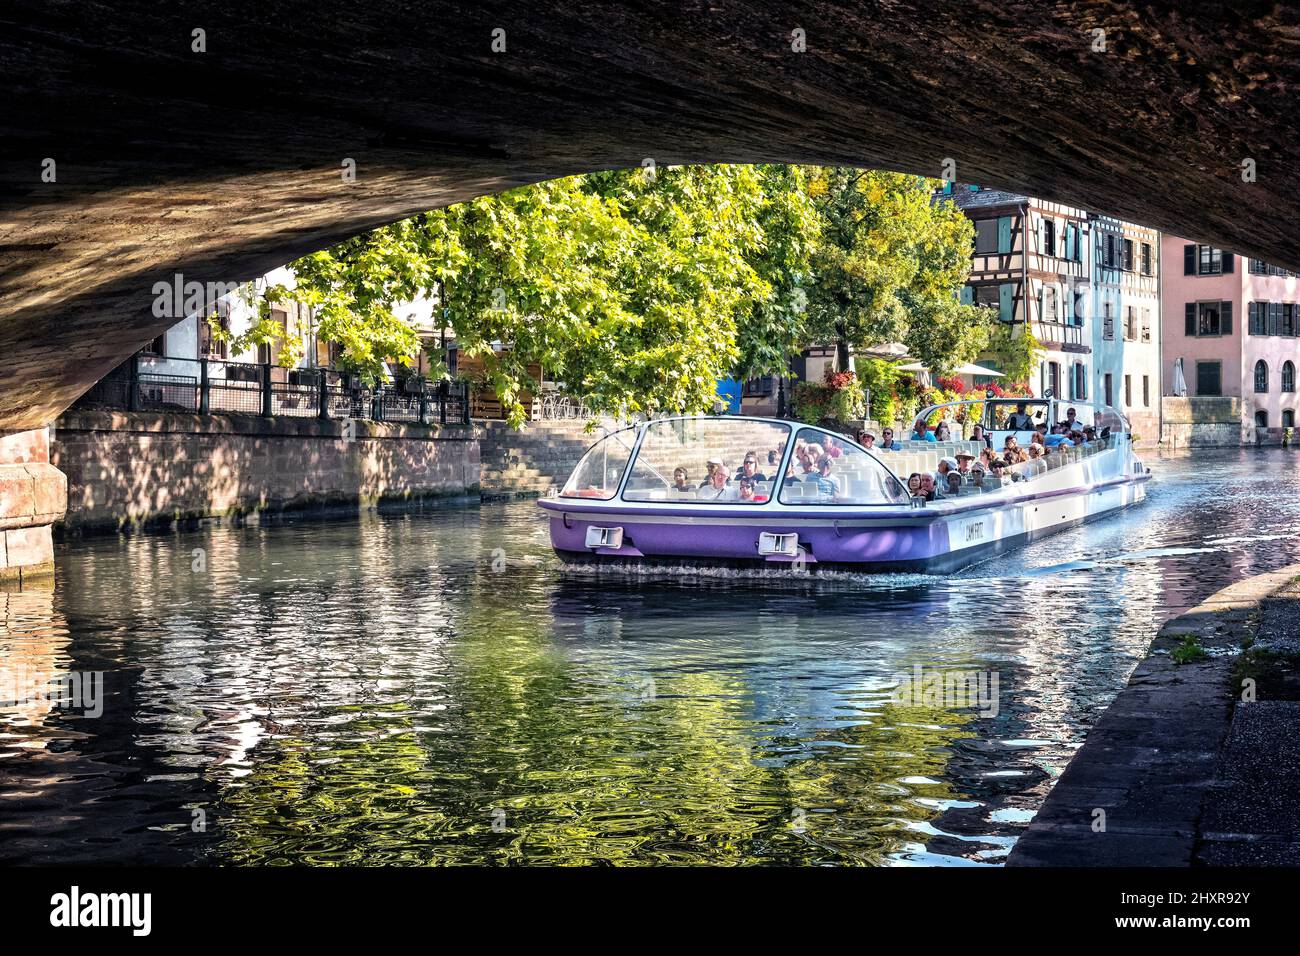 France, Strasbourg, the historic center listed as World Heritage by UNESCO, the Ill river under the Ponts Couverts. Stock Photo